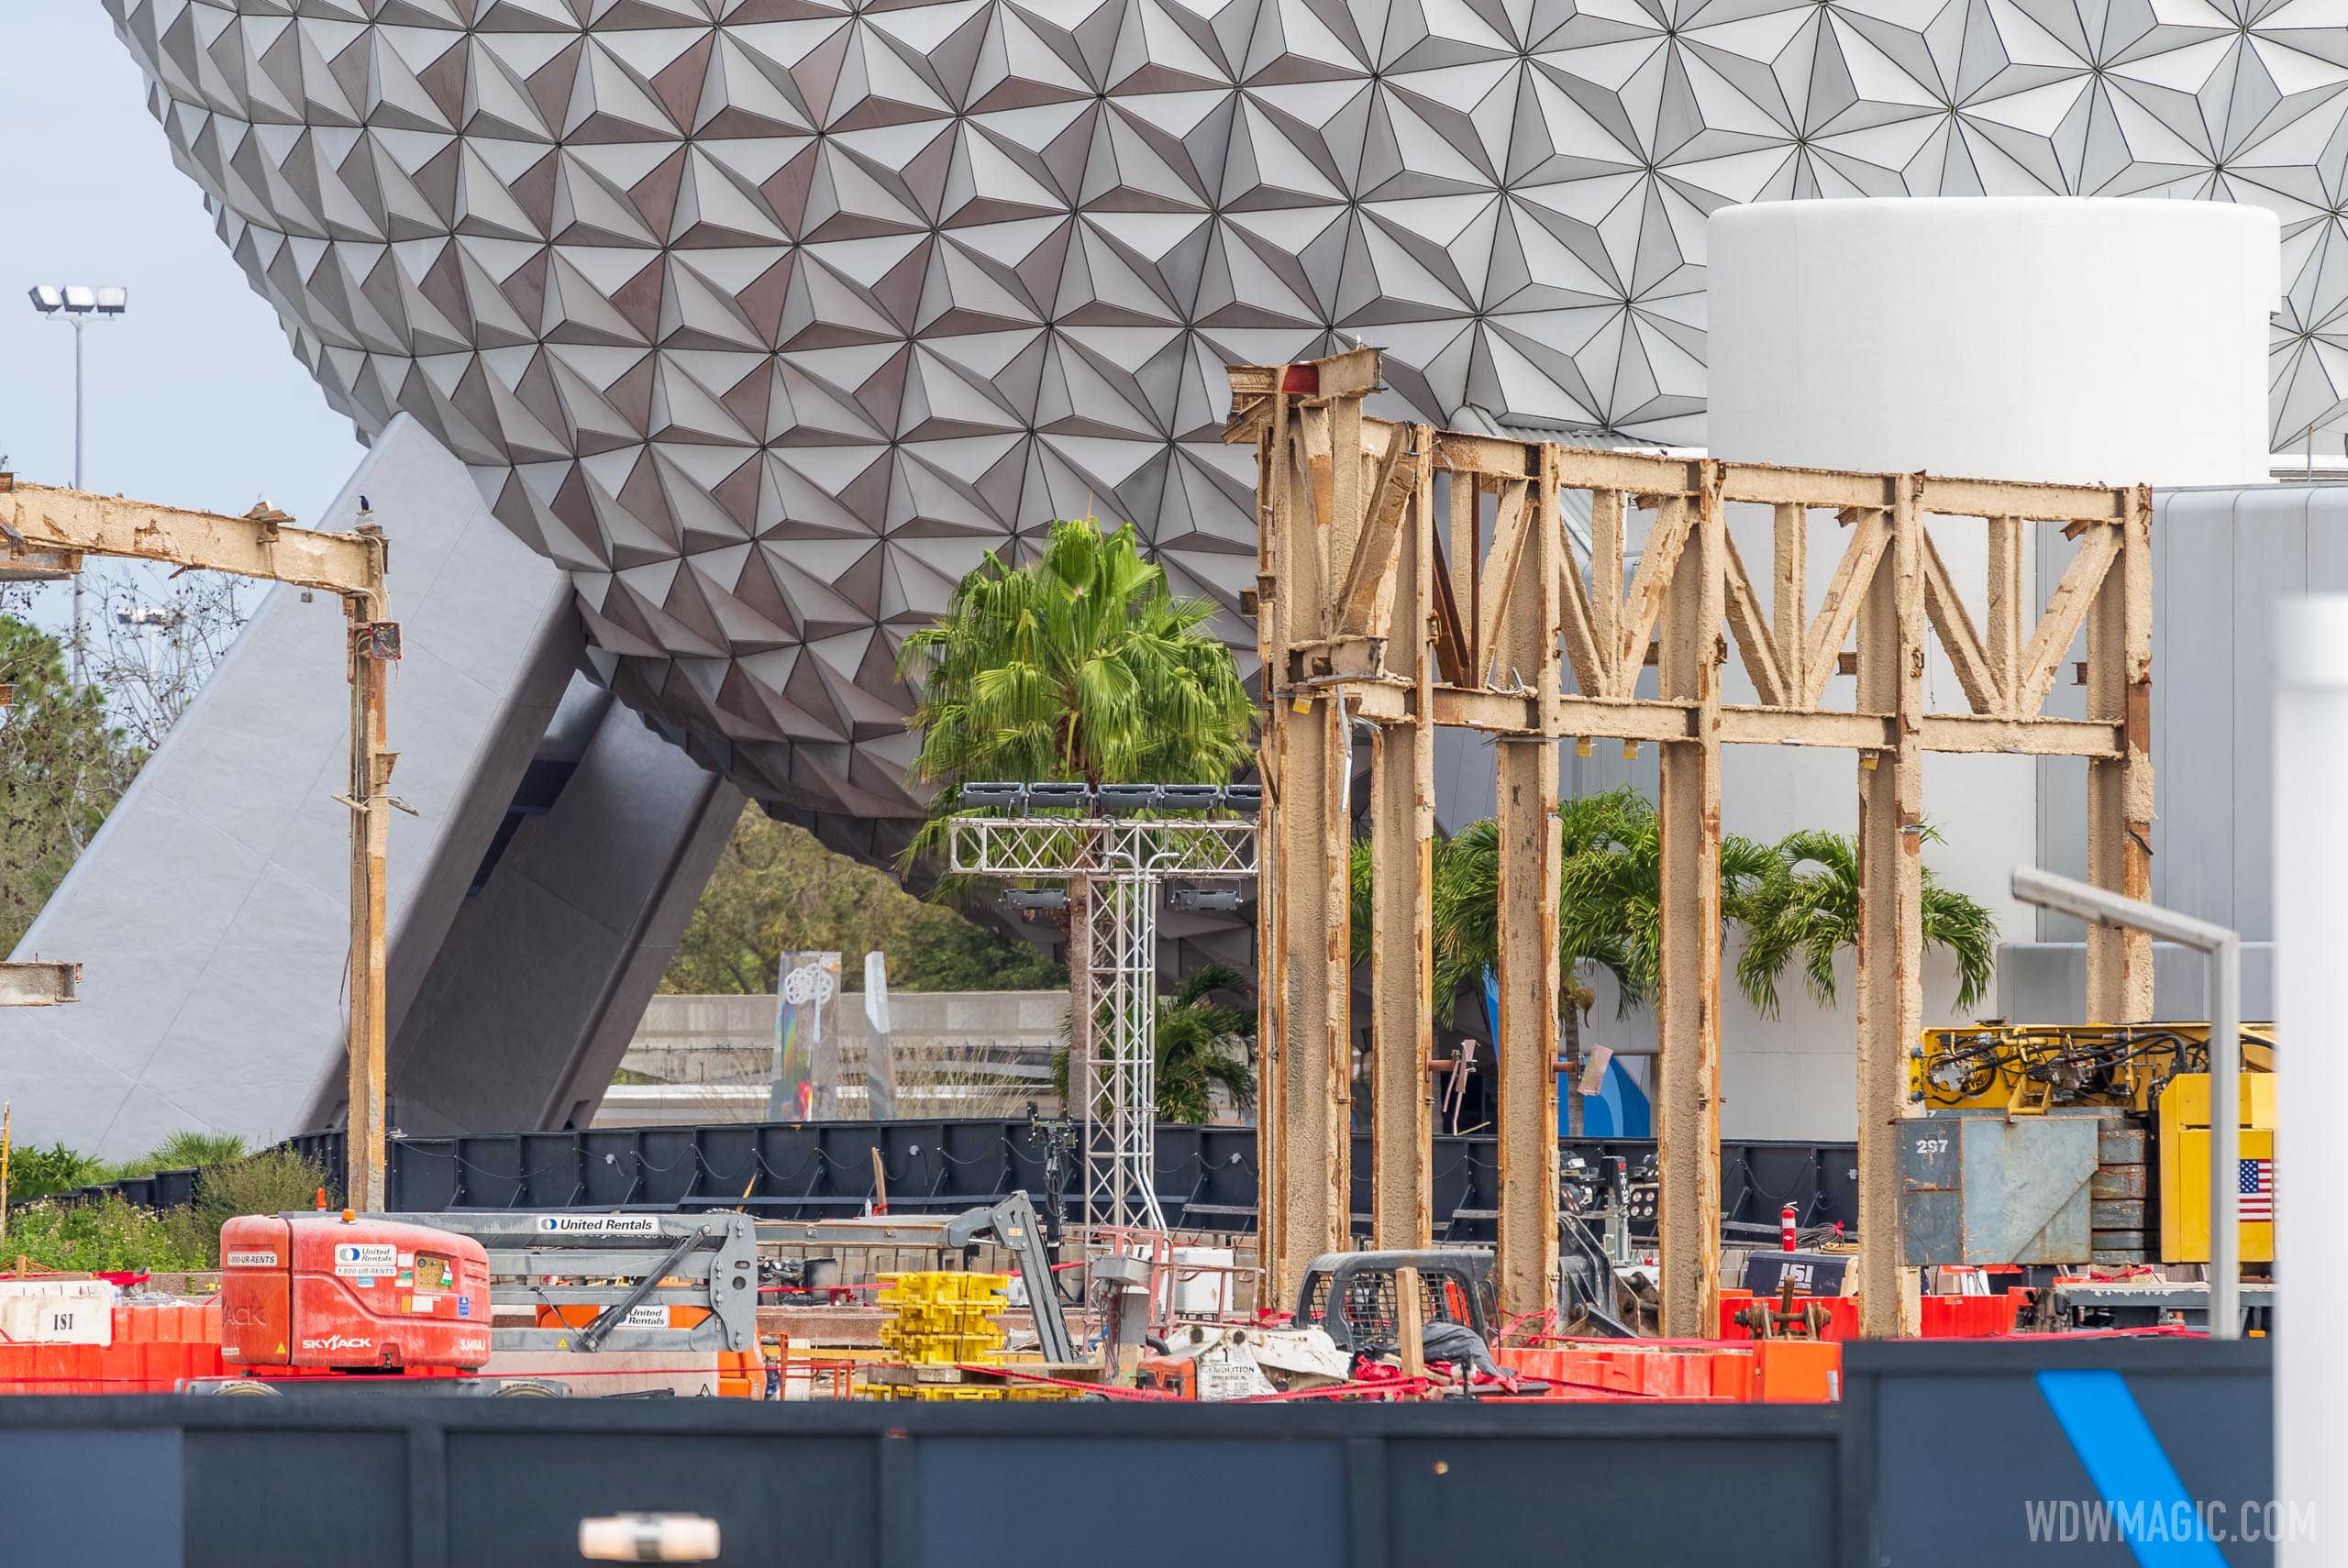 EPCOT Innoventions West demolition - March 2 2021